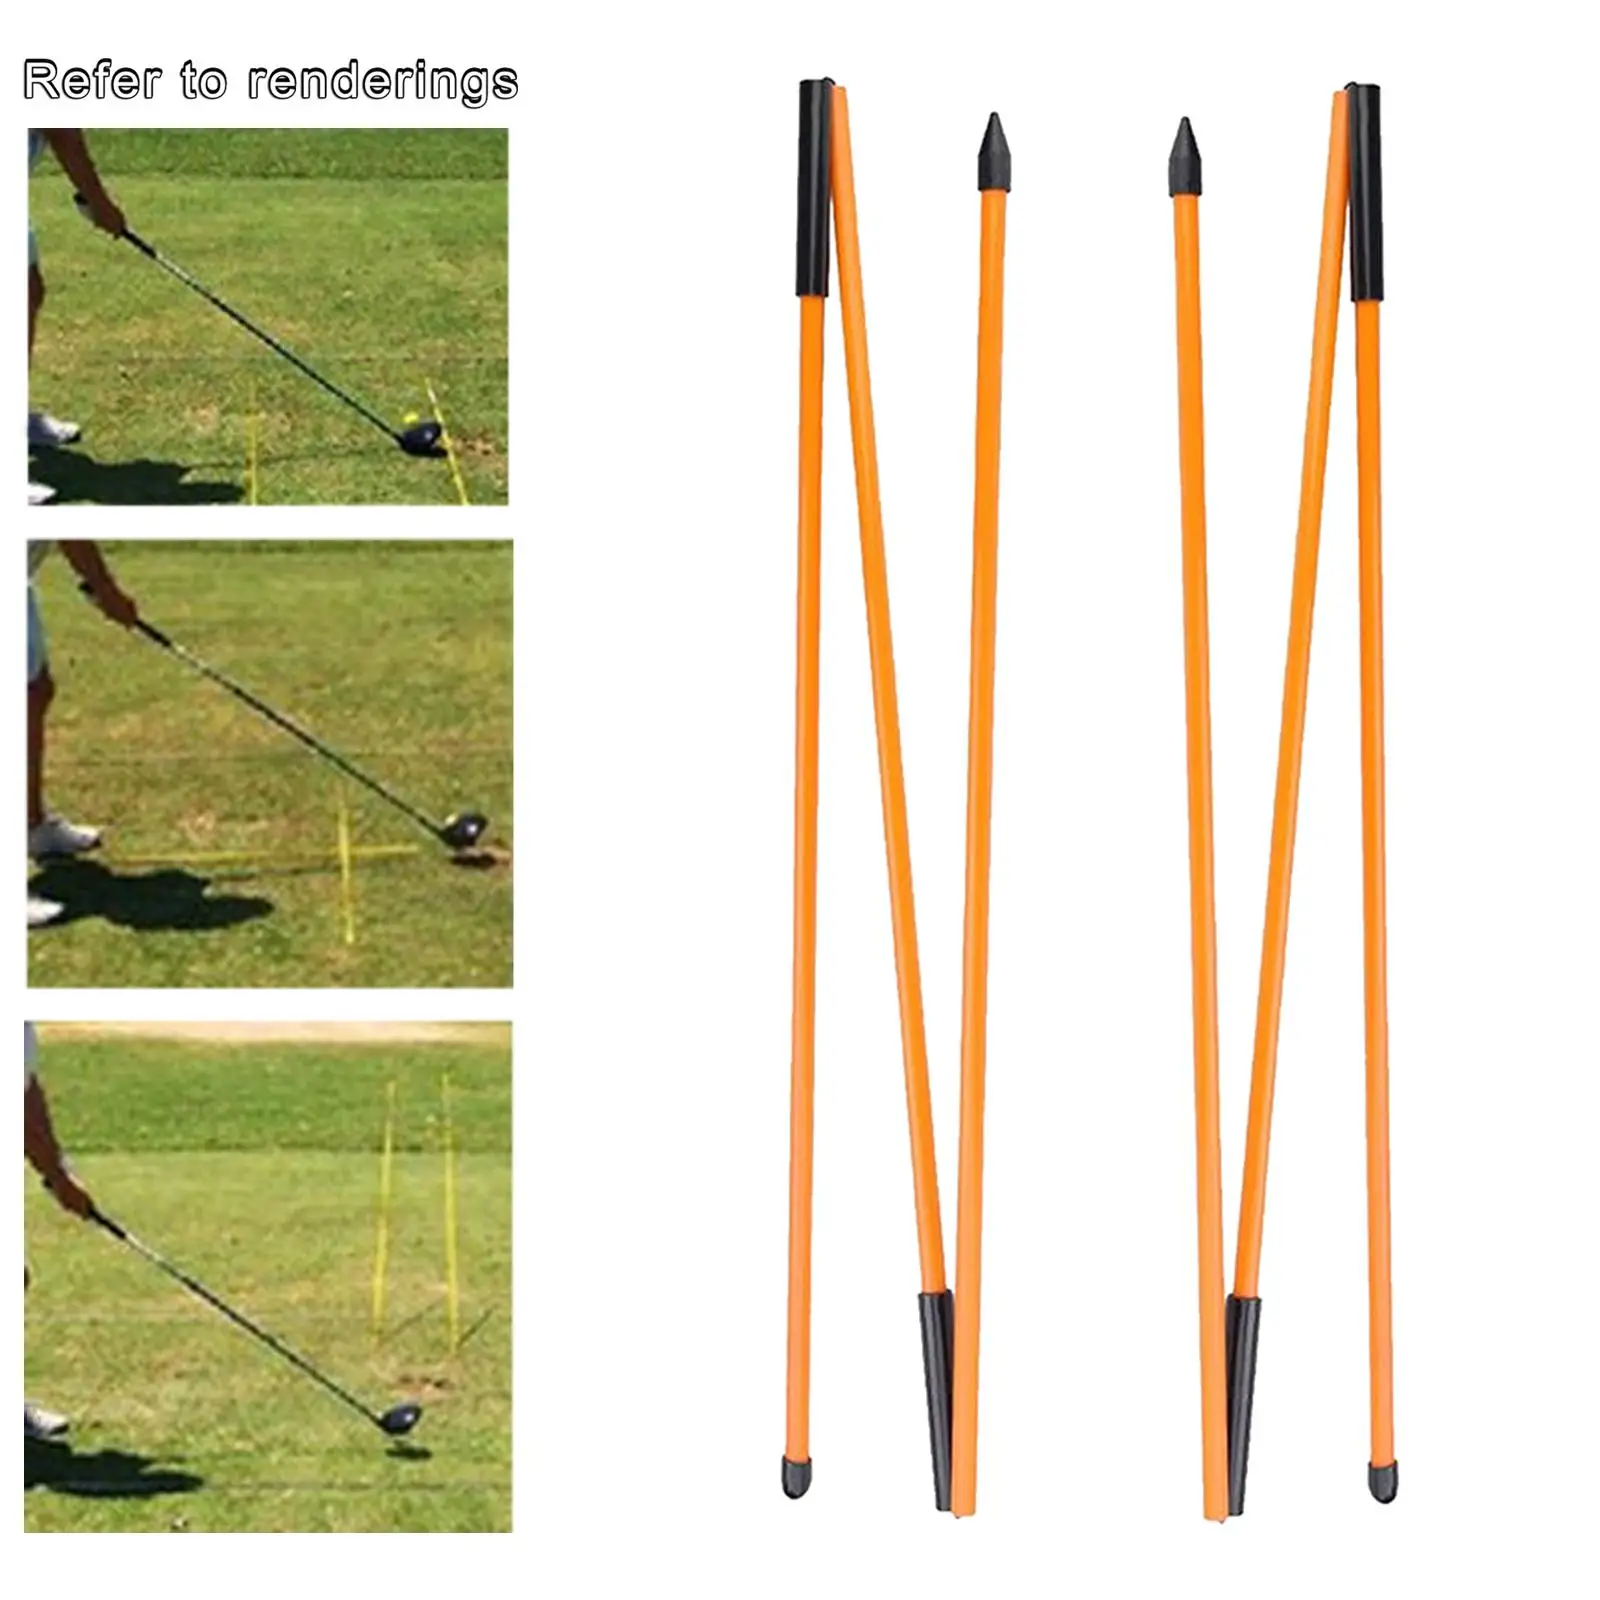 2x 122cm Golf Alignment Rods 3 Sections Foldable Practice Training Sticks Aiming Aid  Posture Corrector